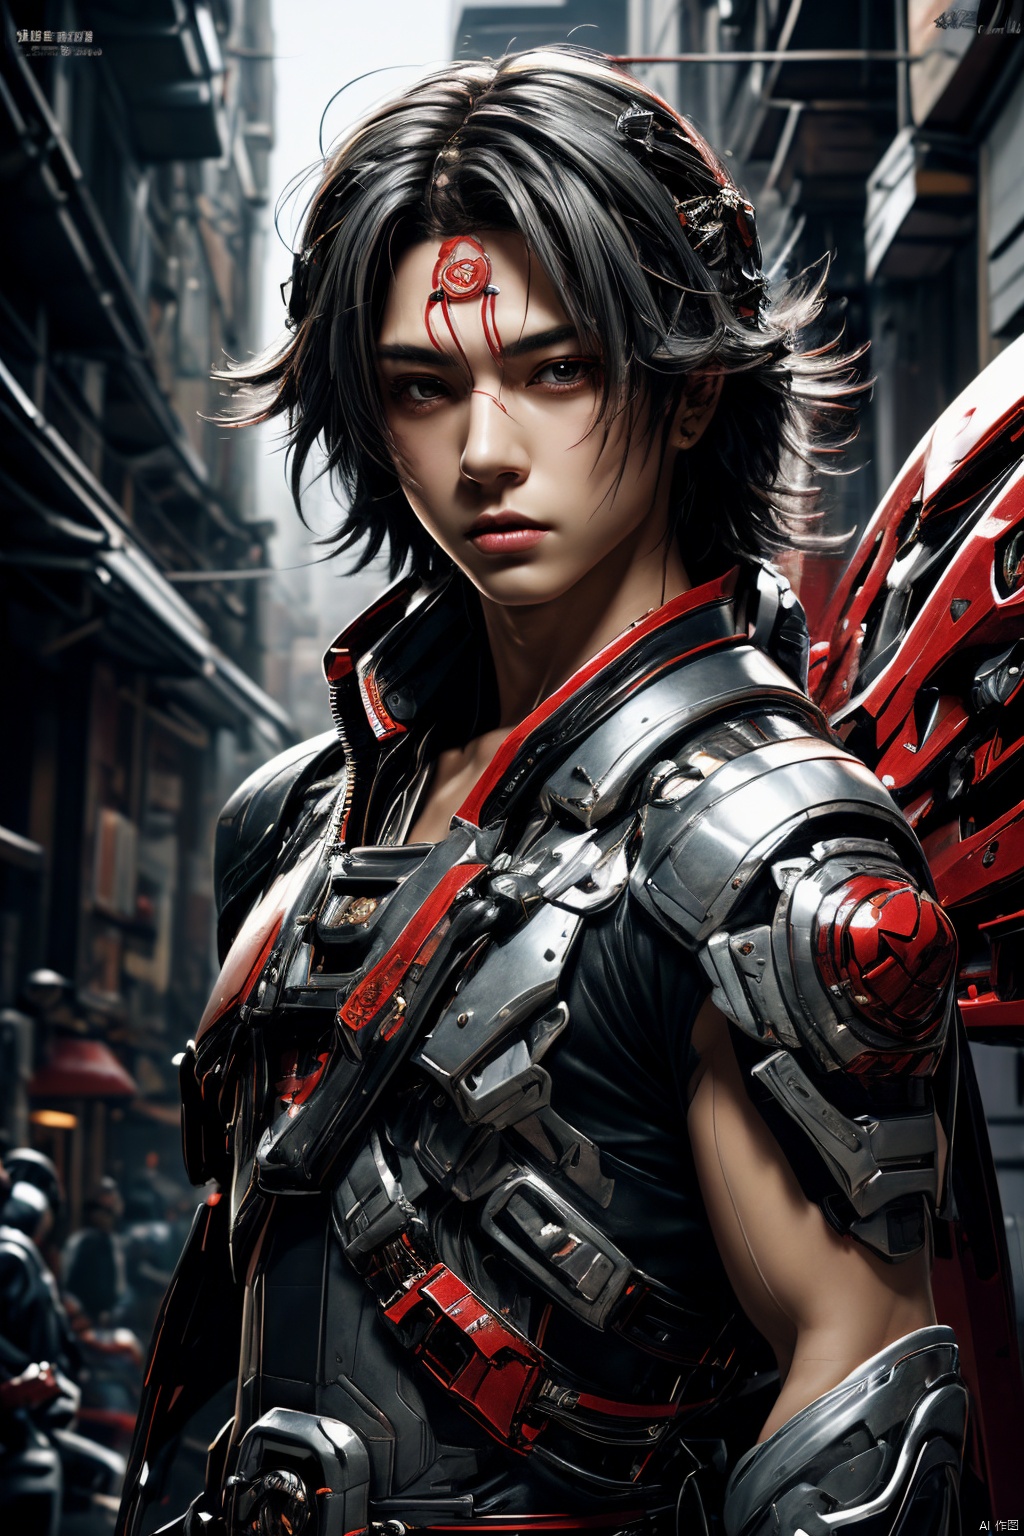  a young man\(asian\), sliver hair, male avatar, punk, Dragon element, Red, in the style of anime-inspired characters, richly layered, gray and crimson, close up, in the style of anime art, gray and crimson, handsome, anime aesthetic, intense close-ups, china punk, in the style of graphic novel inspired illustrations, charming anime characters, realistic hyper-detailed portraits, in the style of vibrant manga, dragon art, intricate layering, Dragons are wrapped around, Lateral face, anime style